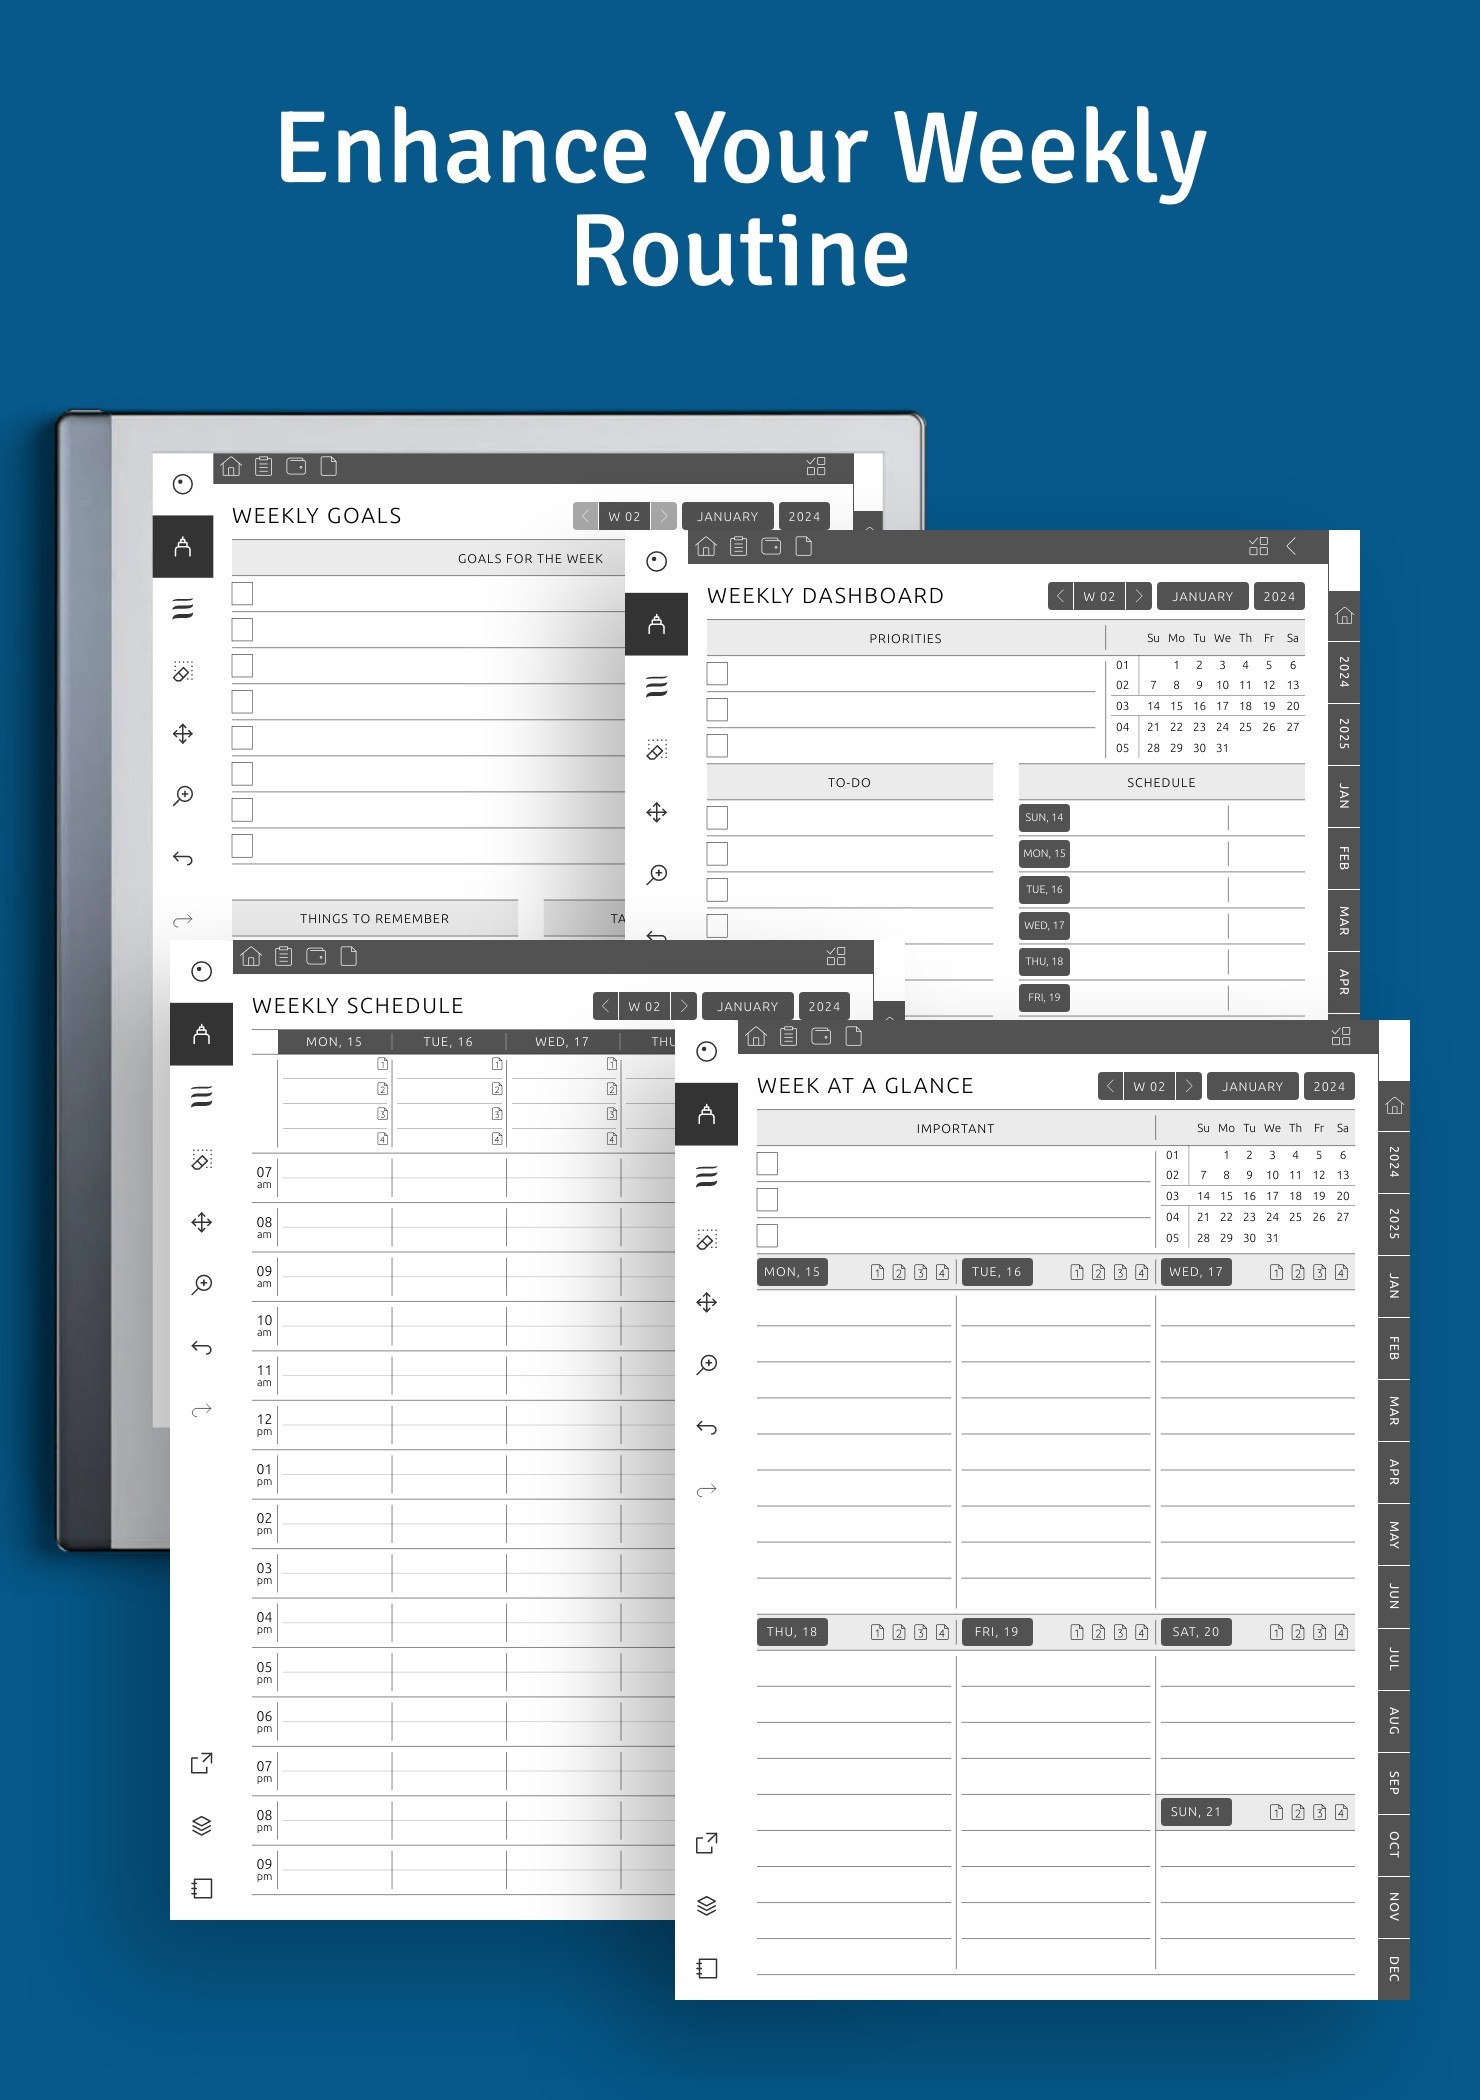 varioius weekly layouts available